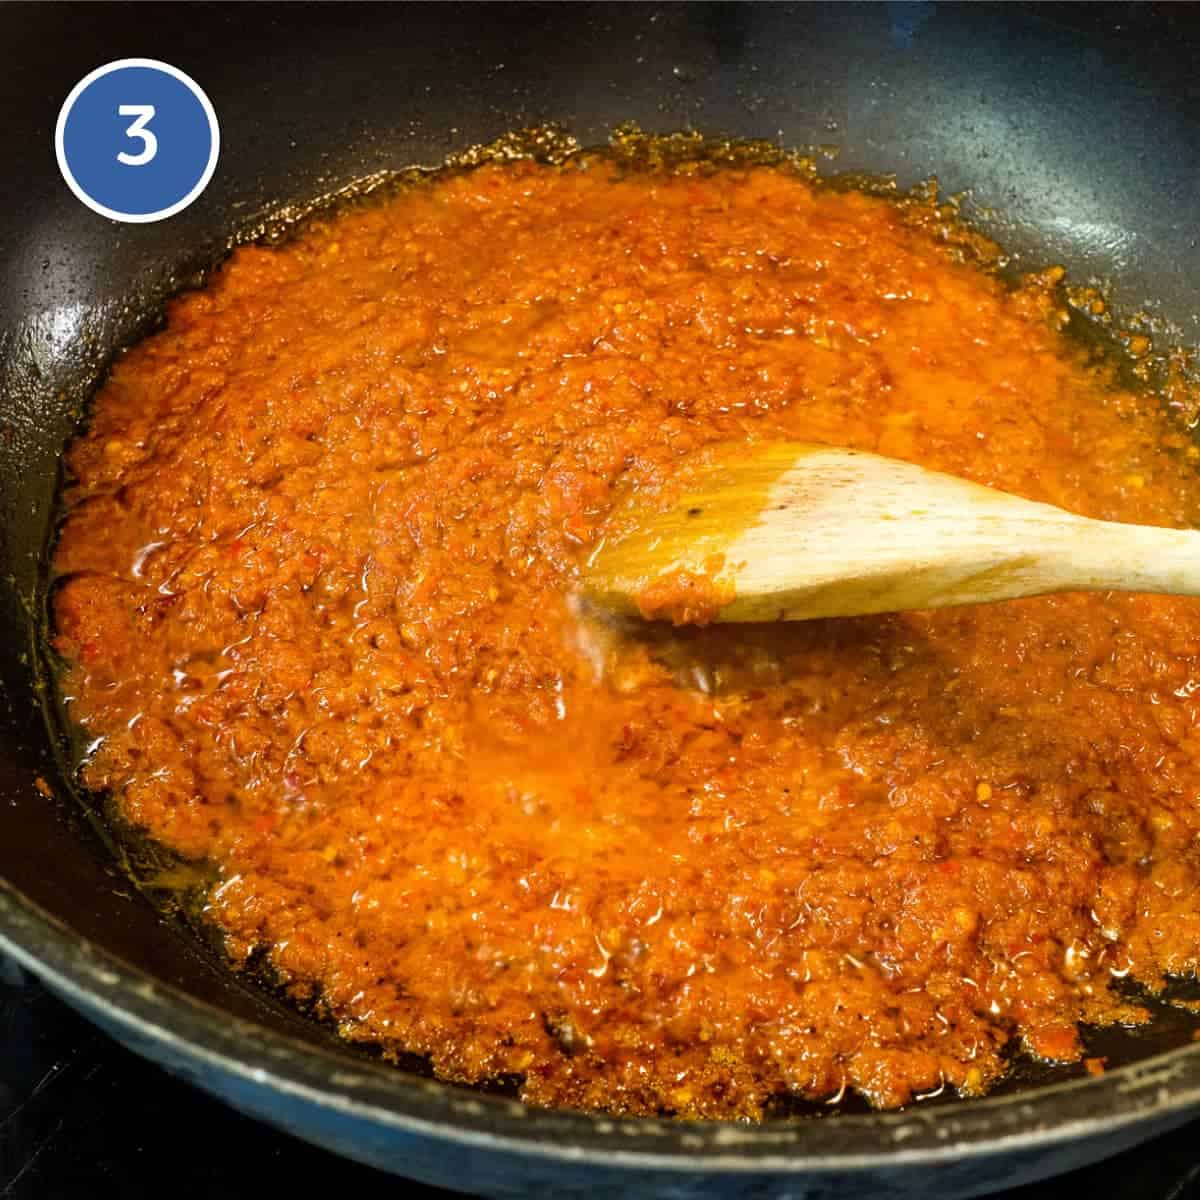 Malaysian Sambal Sauce being fried in oil